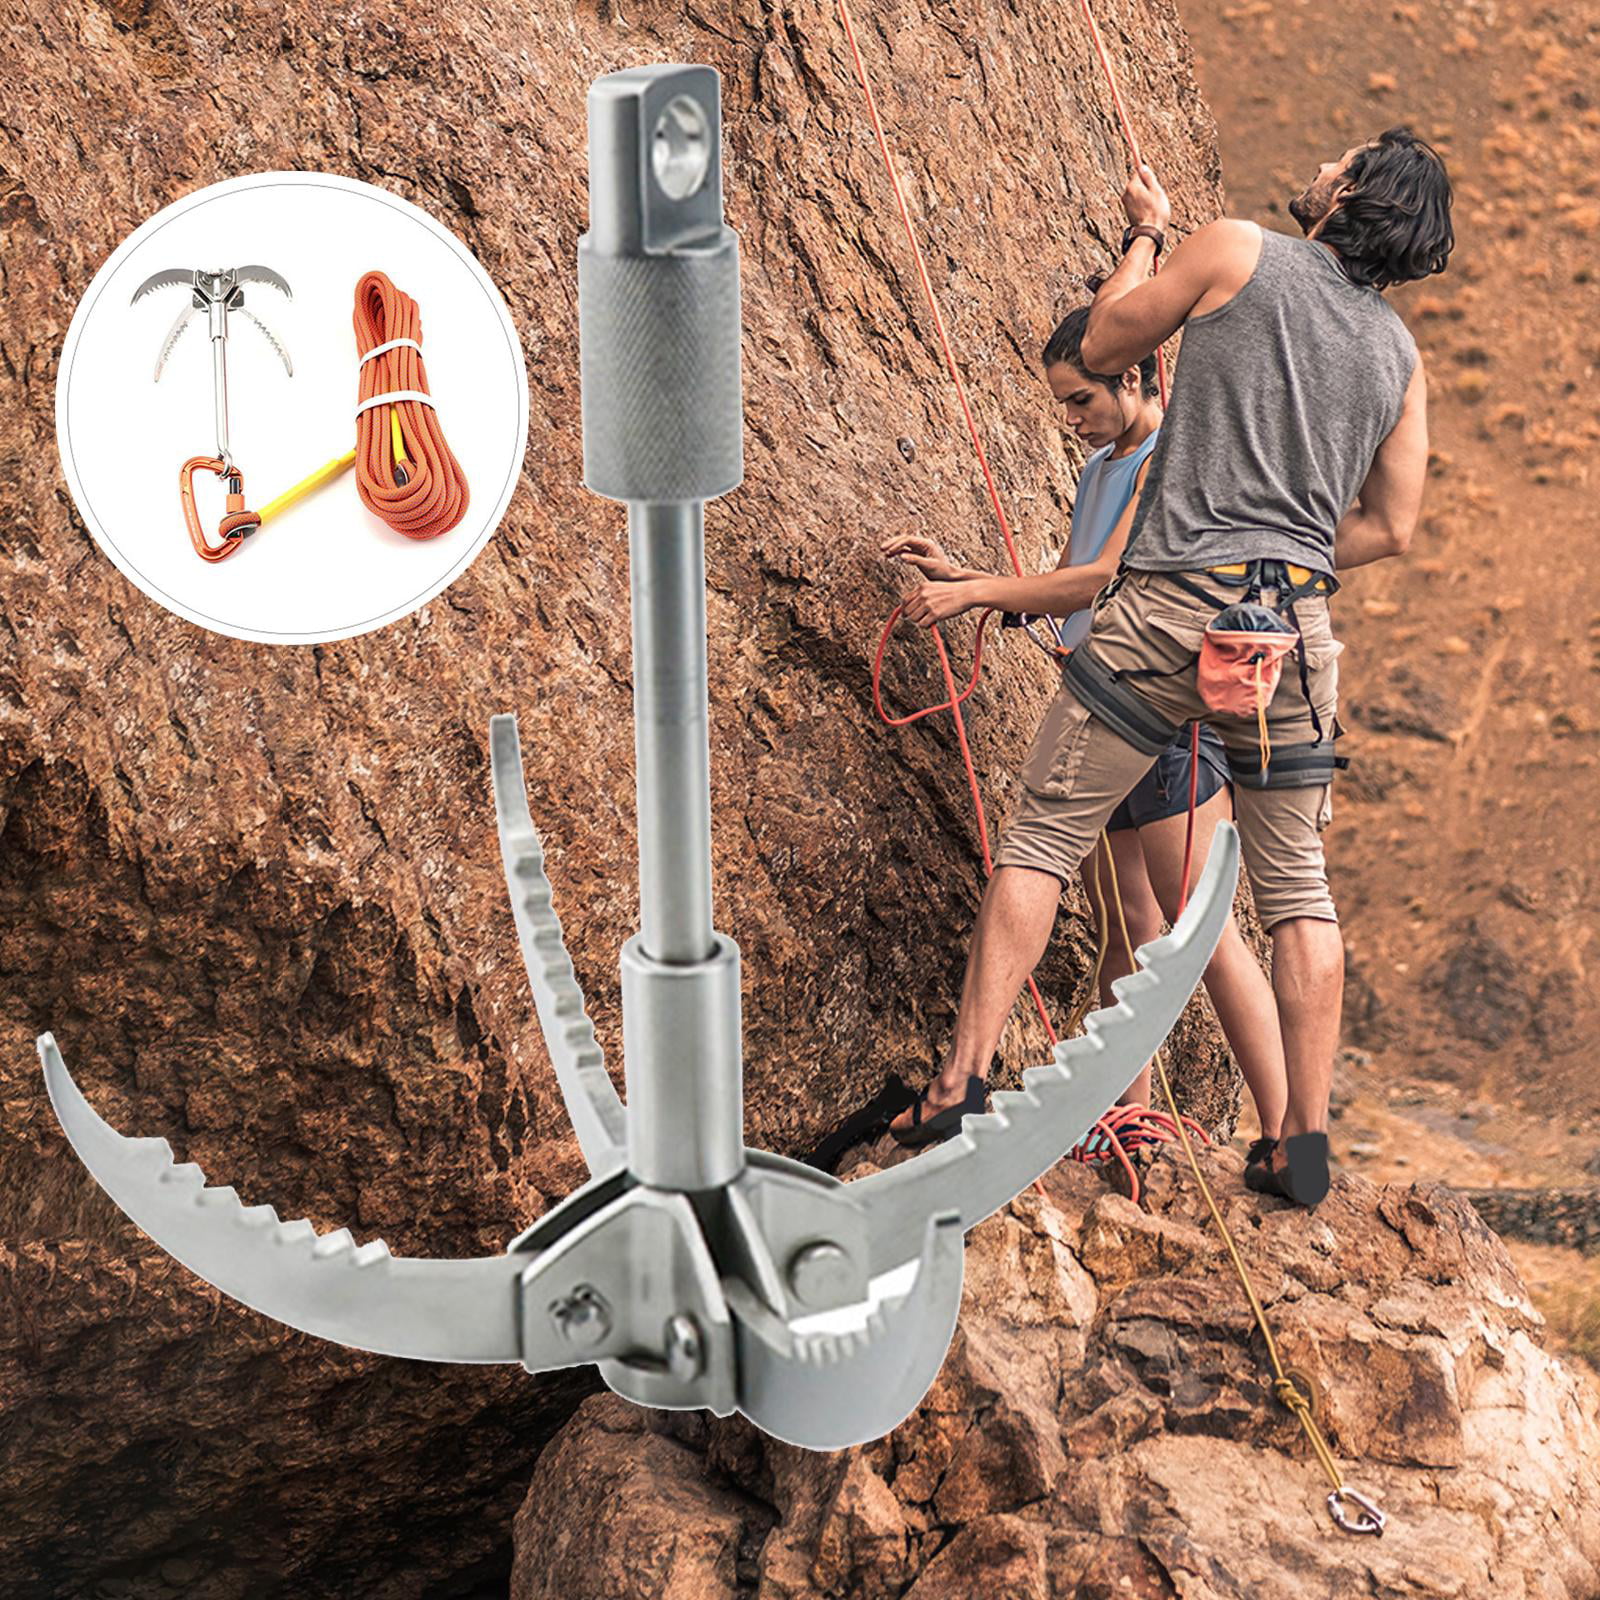 QUADPALM Grappling Hook with 10M Rope – Multifunctional Grapple Hook - 4 Stainless Steel Folding Claws - Heavy Duty - Outdoor Camping Hiking Tree